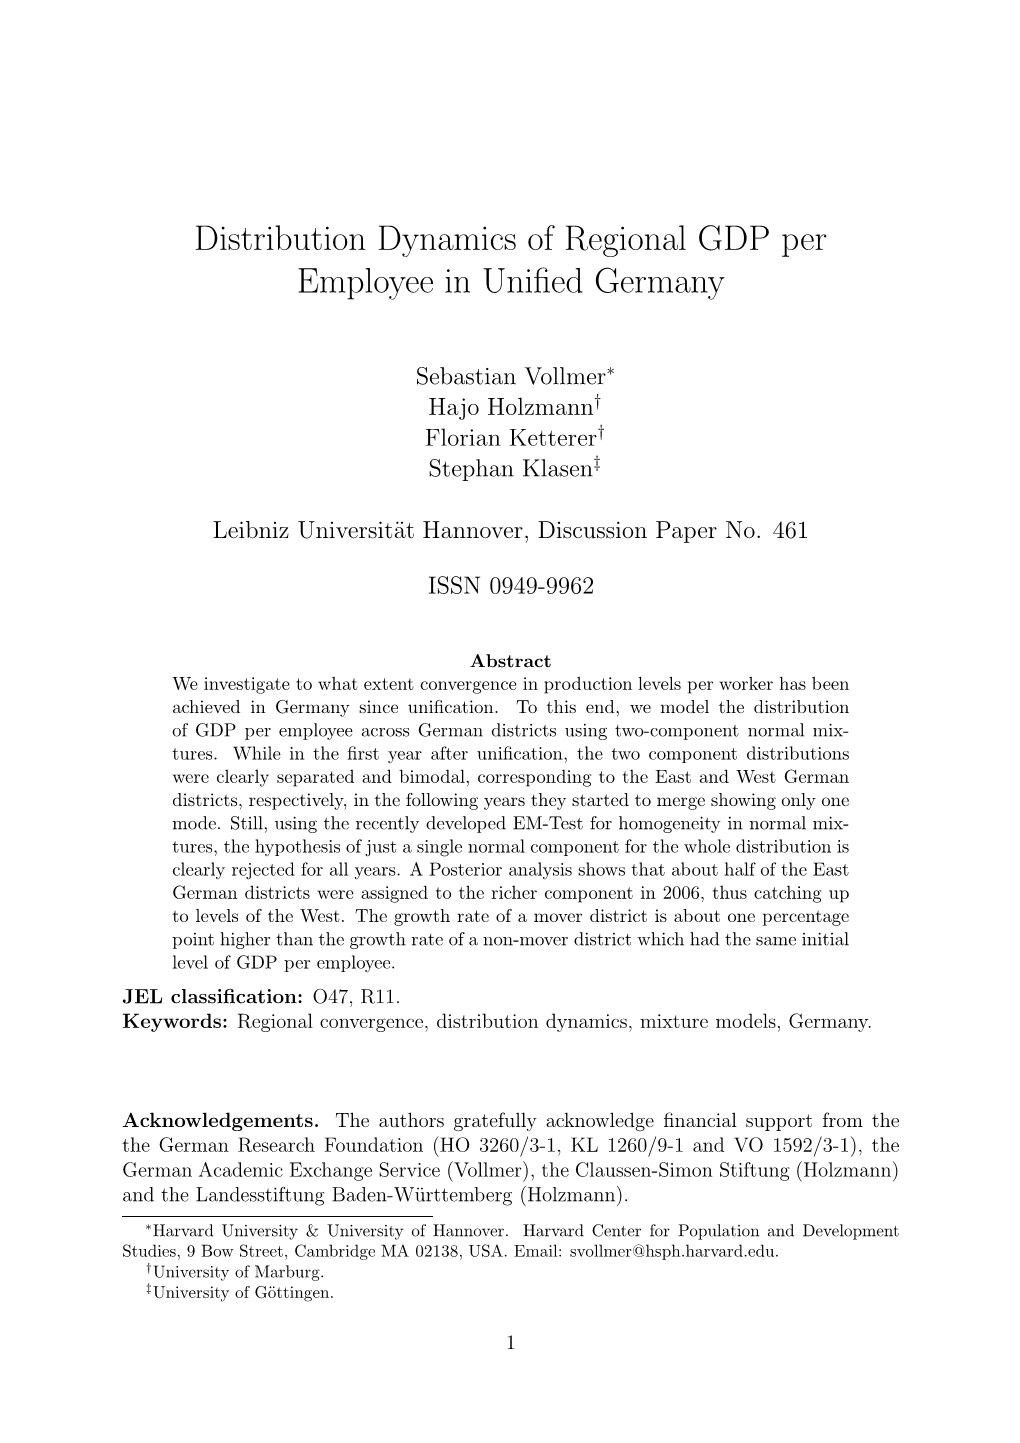 Distribution Dynamics of Regional GDP Per Employee in Unified